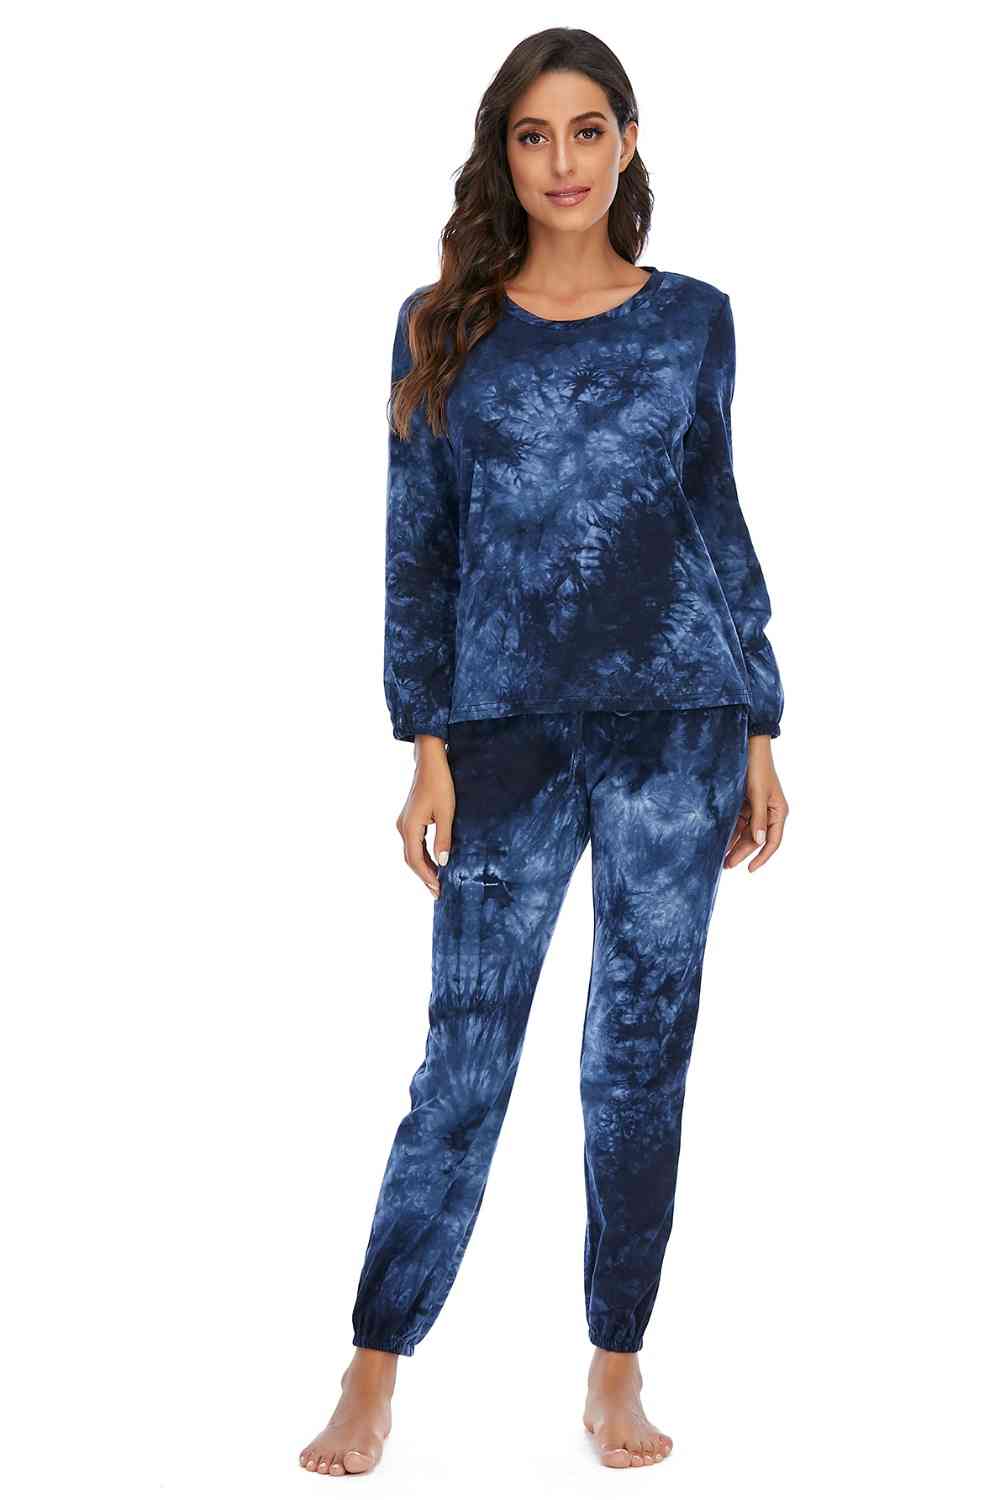 Tie-Dye Top and Drawstring Pants Lounge Set free shipping -Oh Em Gee Boutique